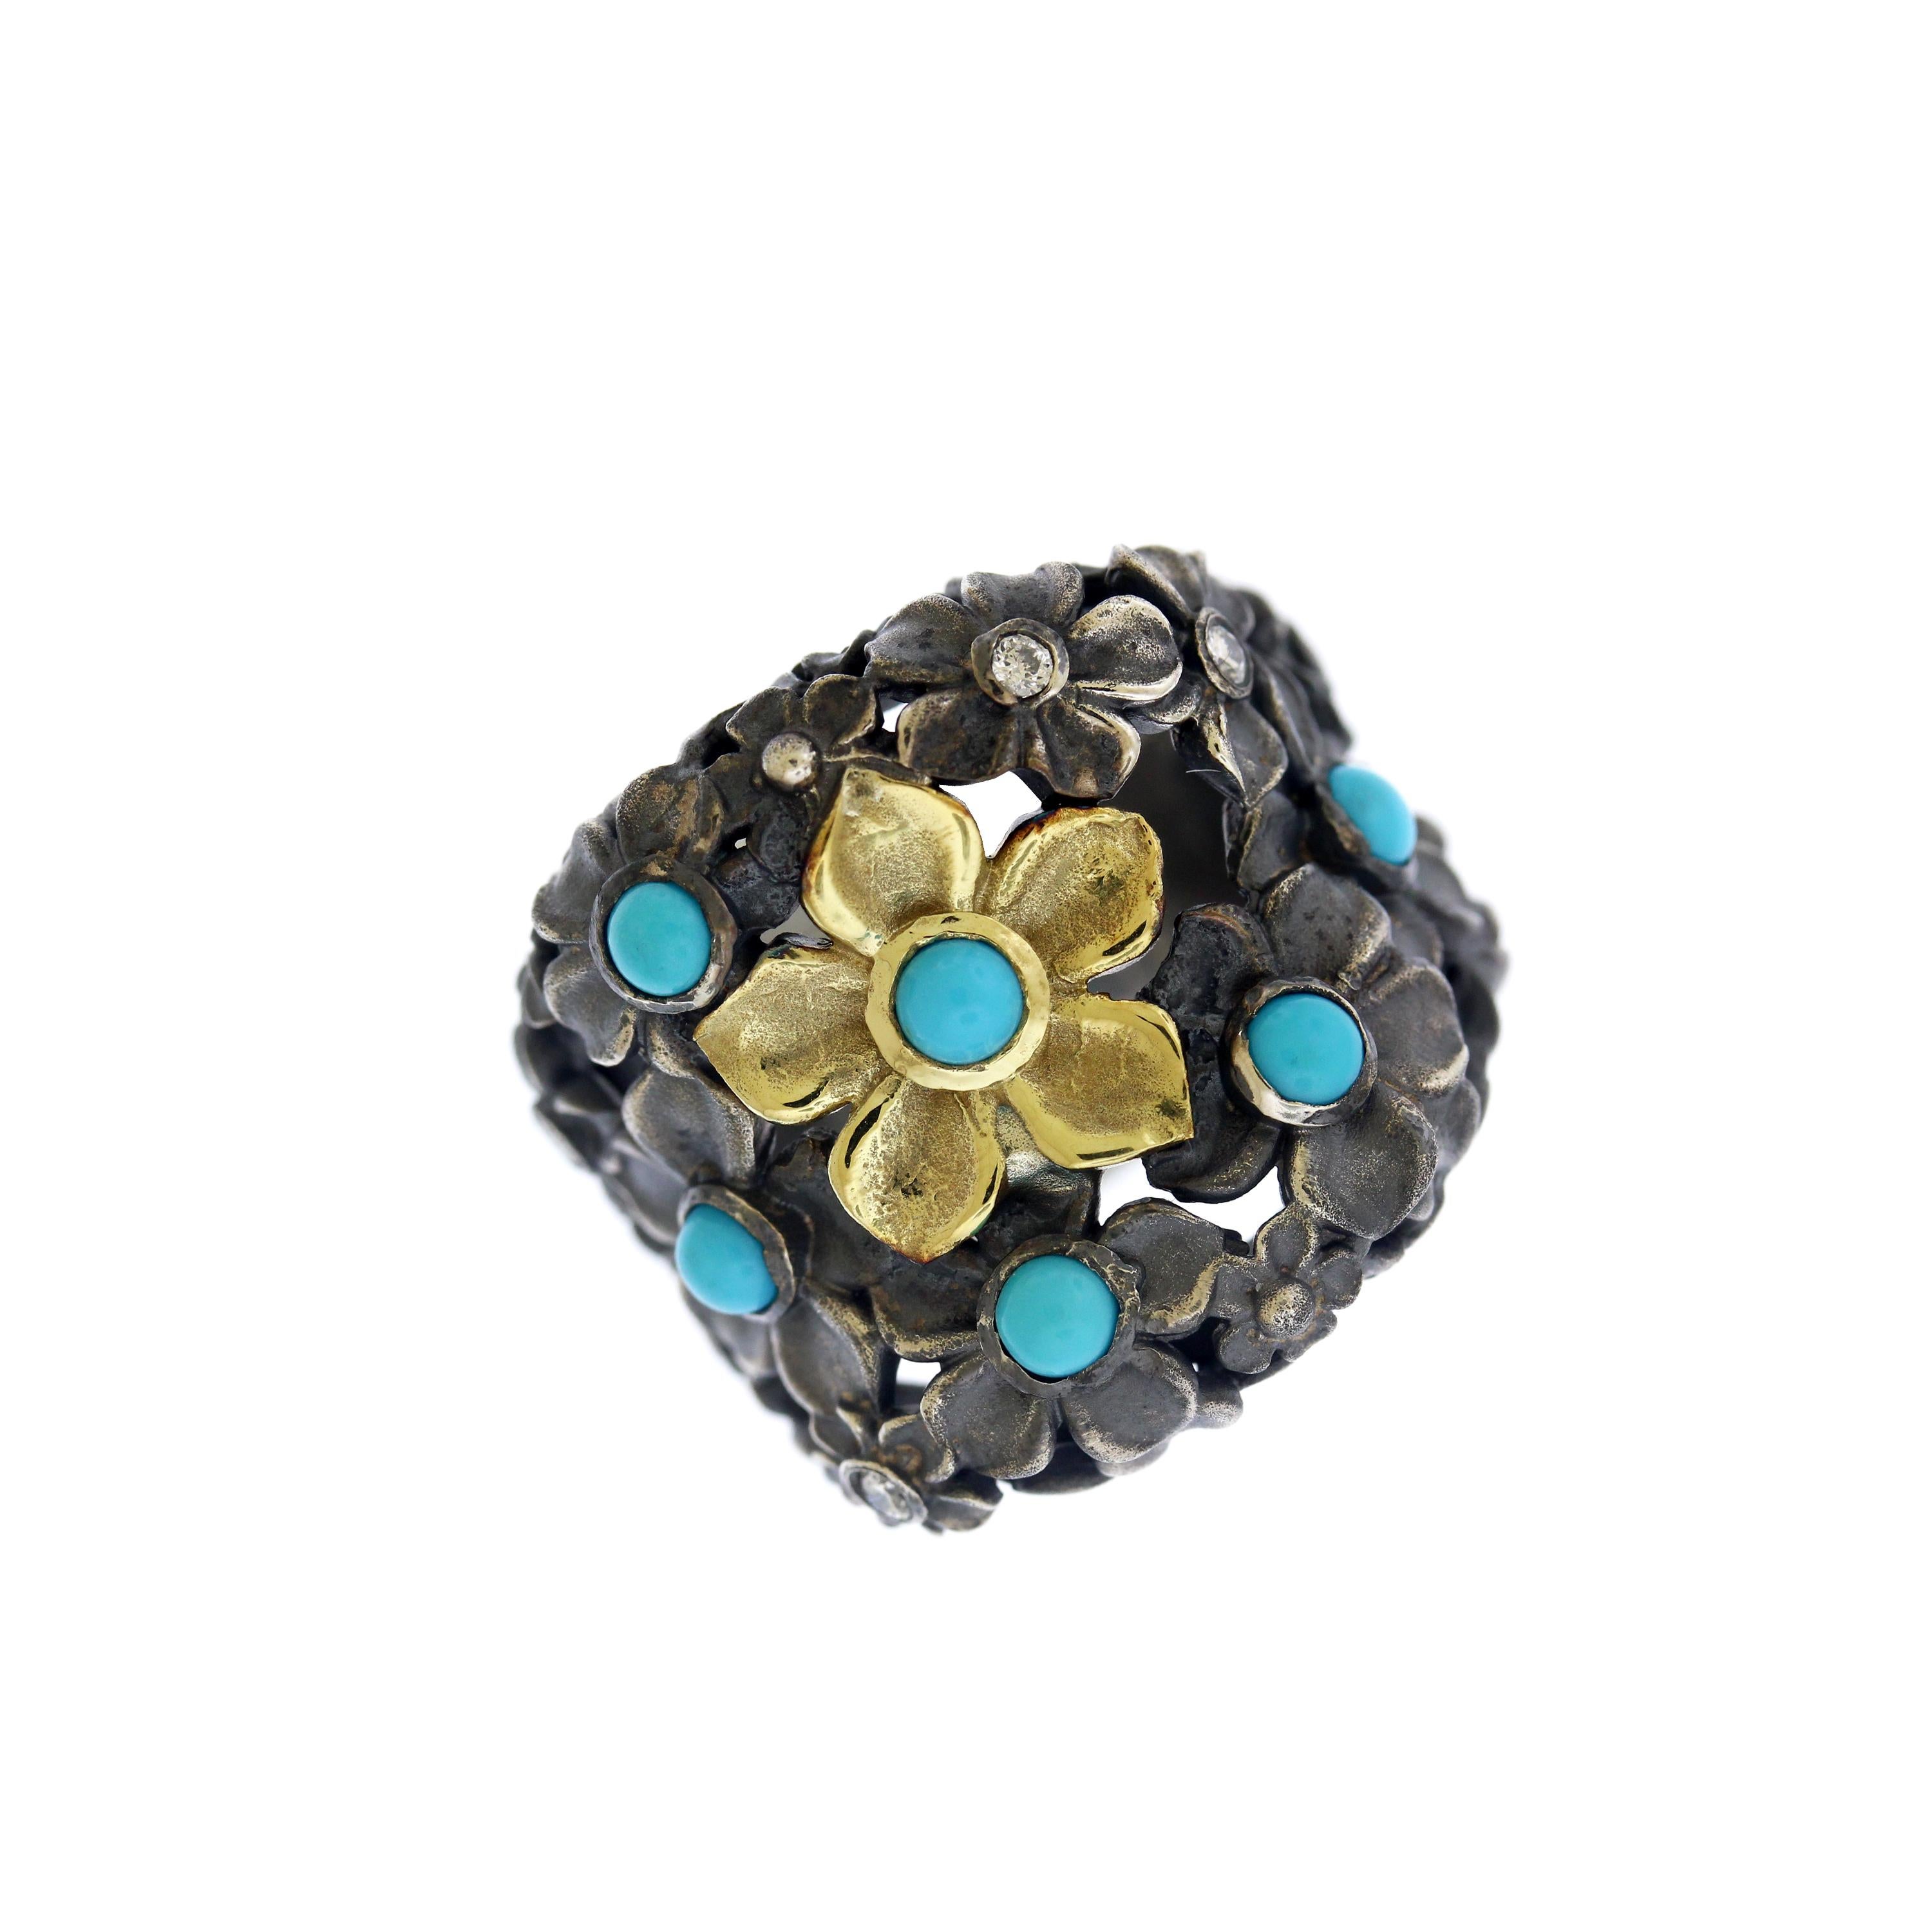 Stambolian Aged Silver & 18K Yellow Gold Flower Ring with Sleeping Beauty Turquoise. 

18K Yellow Gold Center Flower and Aged Silver Flowers all around.

0.14 carat diamonds.

2 carat approximate round Sleeping Beauty Turquoise.

Ring face is 0.9